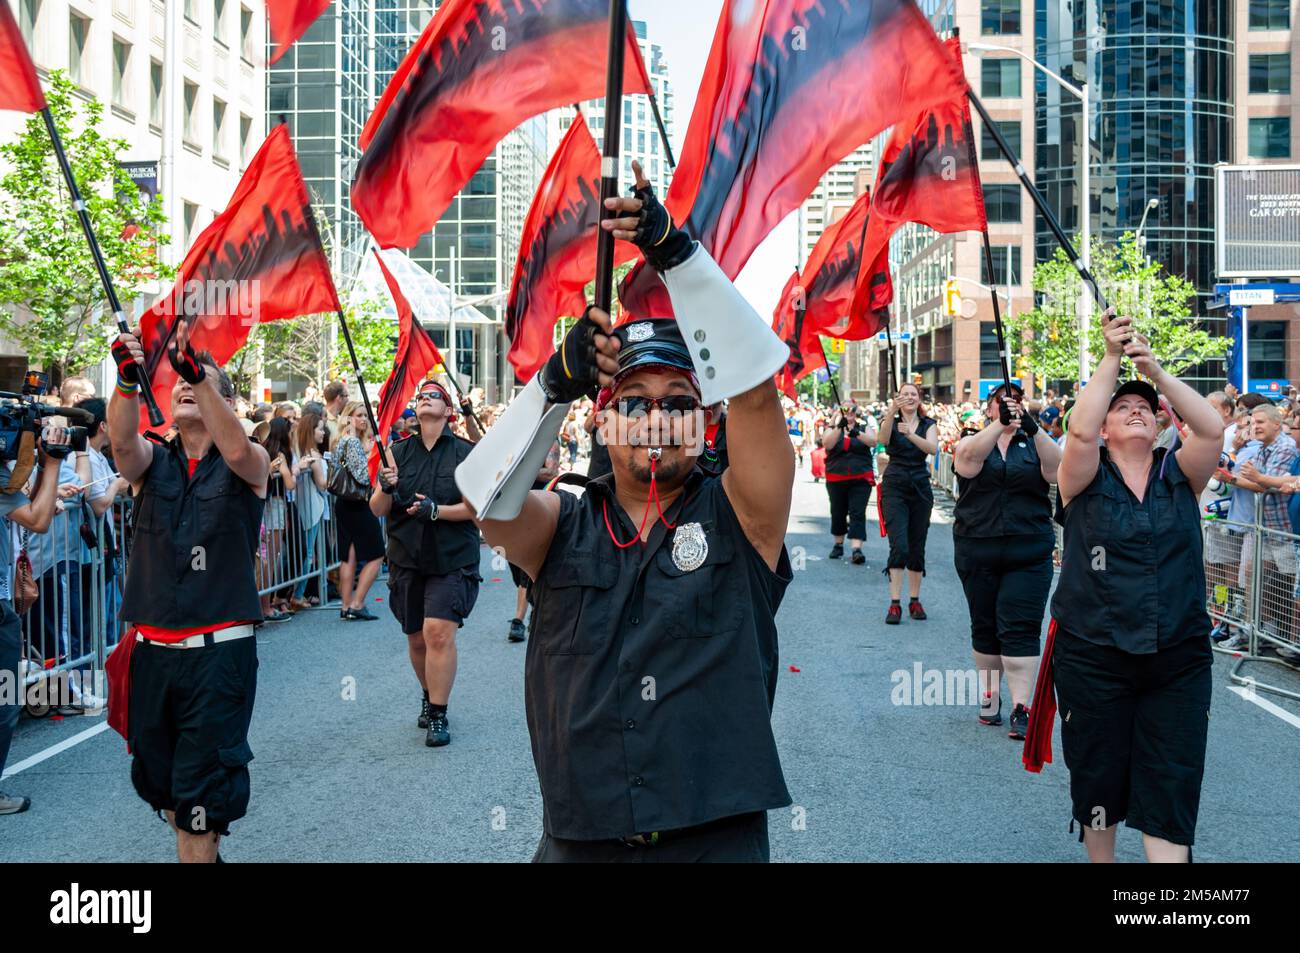 A group of people with red and black flags marches as part of the annual LGBTQ+ annual celebration. Symmetric view. Stock Photo